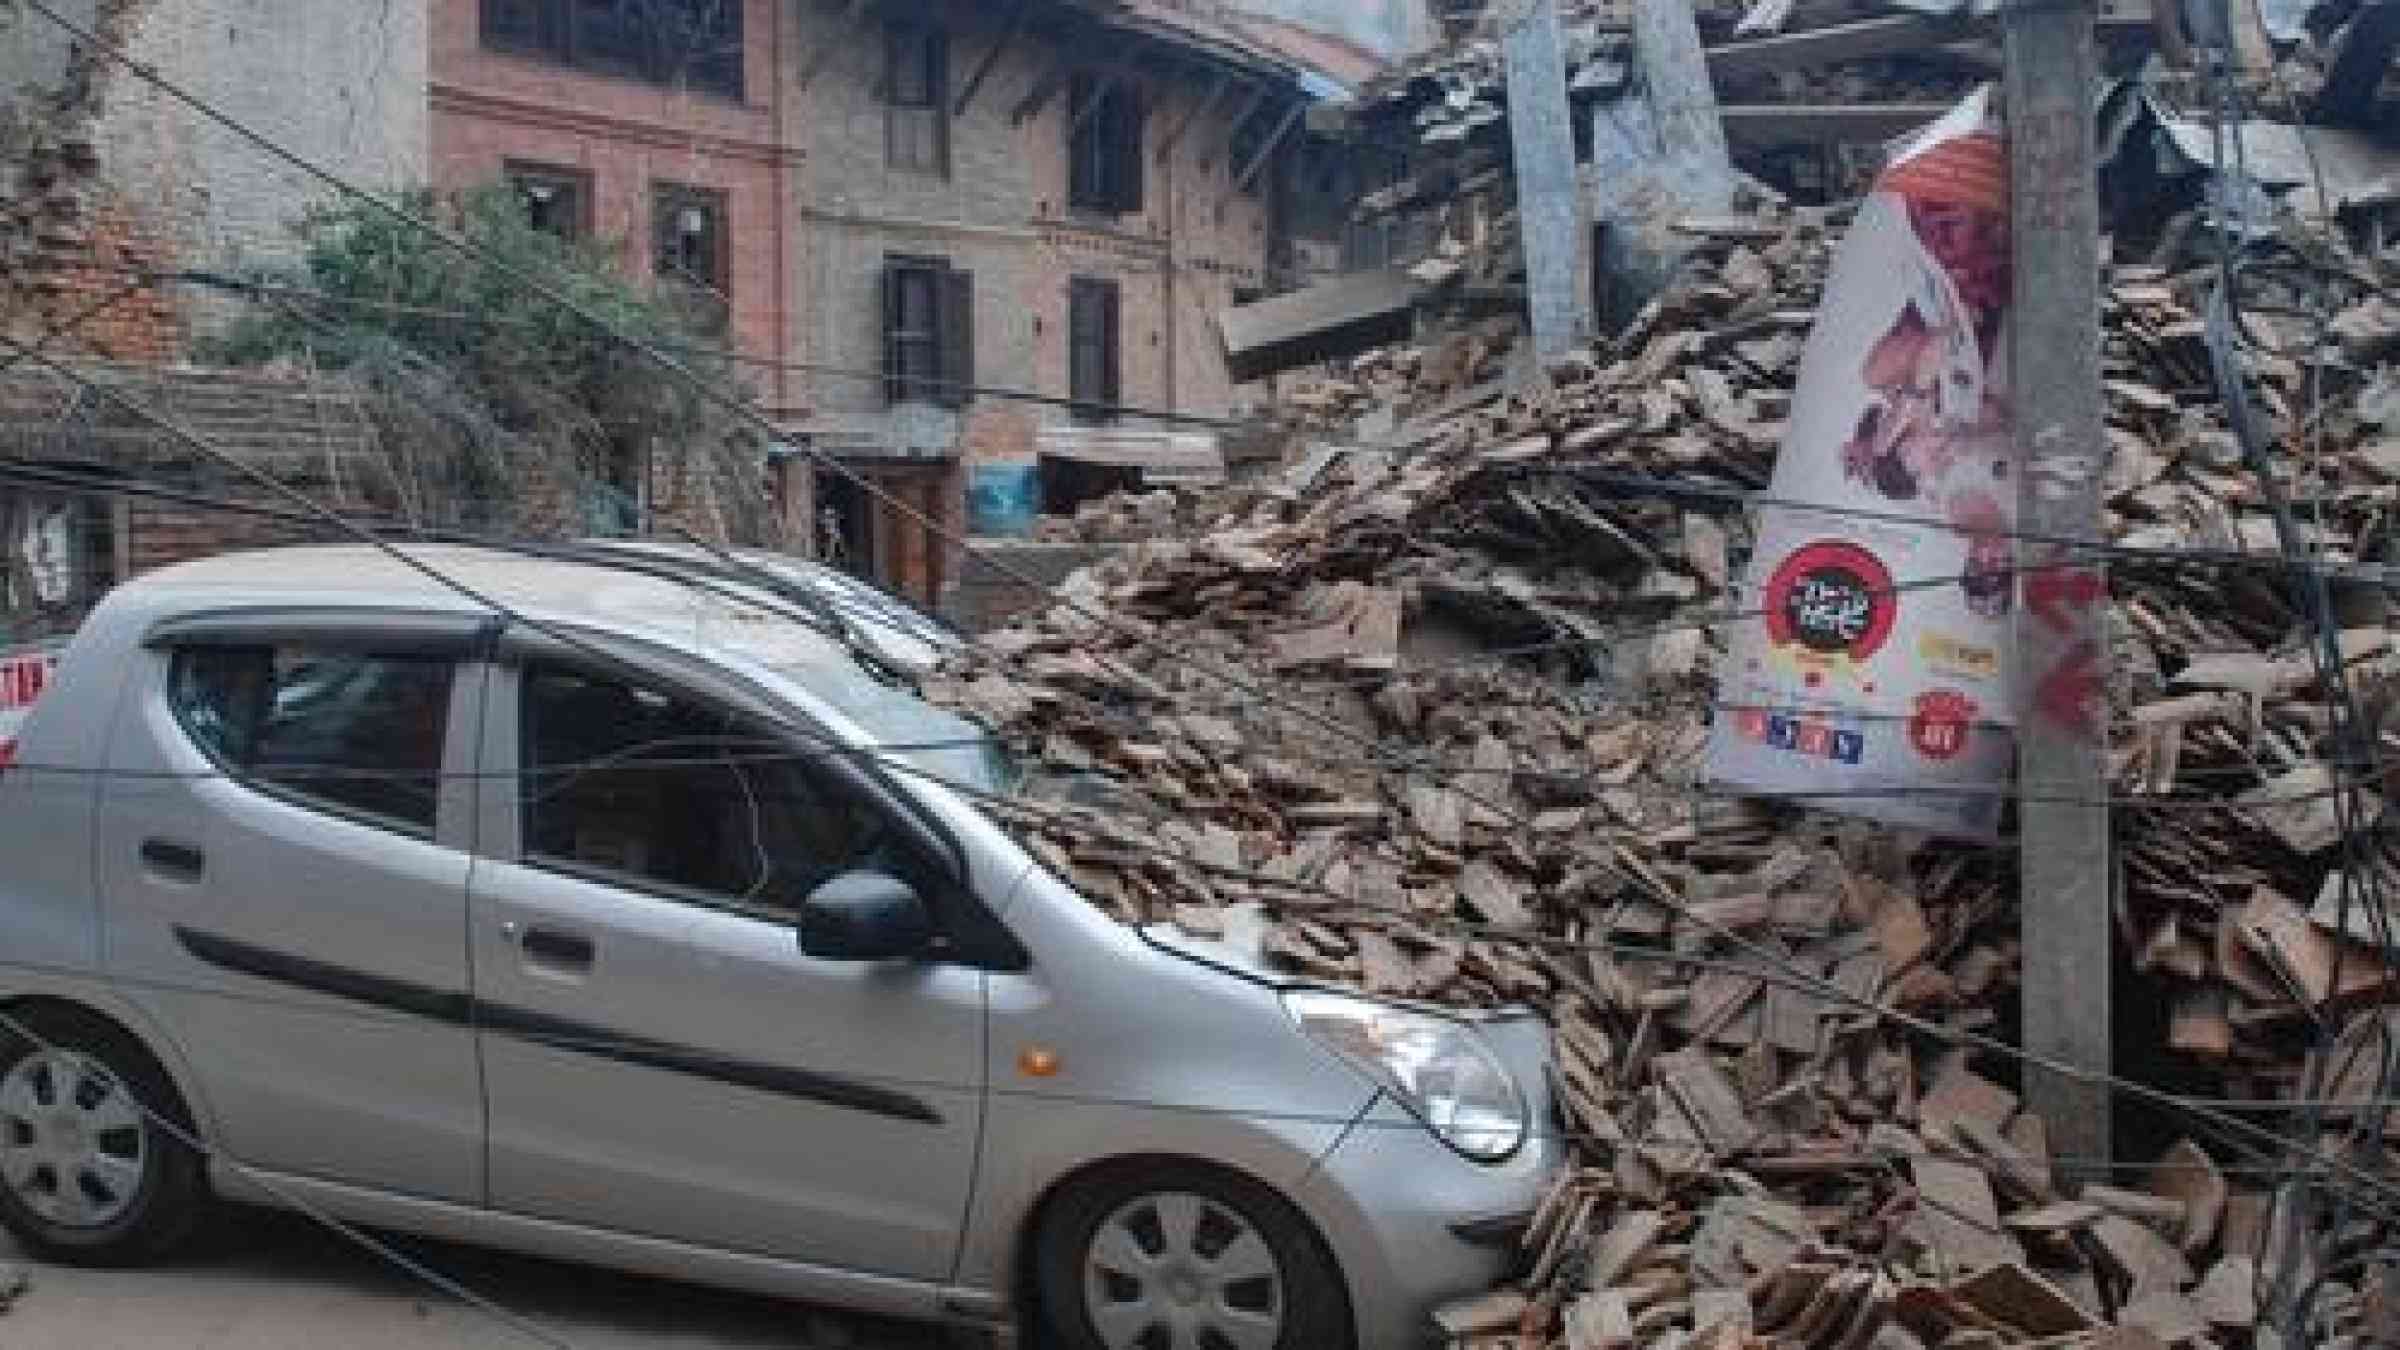 The massive earthquake has caused devastation in Nepal, one of the world's most hazard-prone countries (CAFOD/Edyta Stepczak)